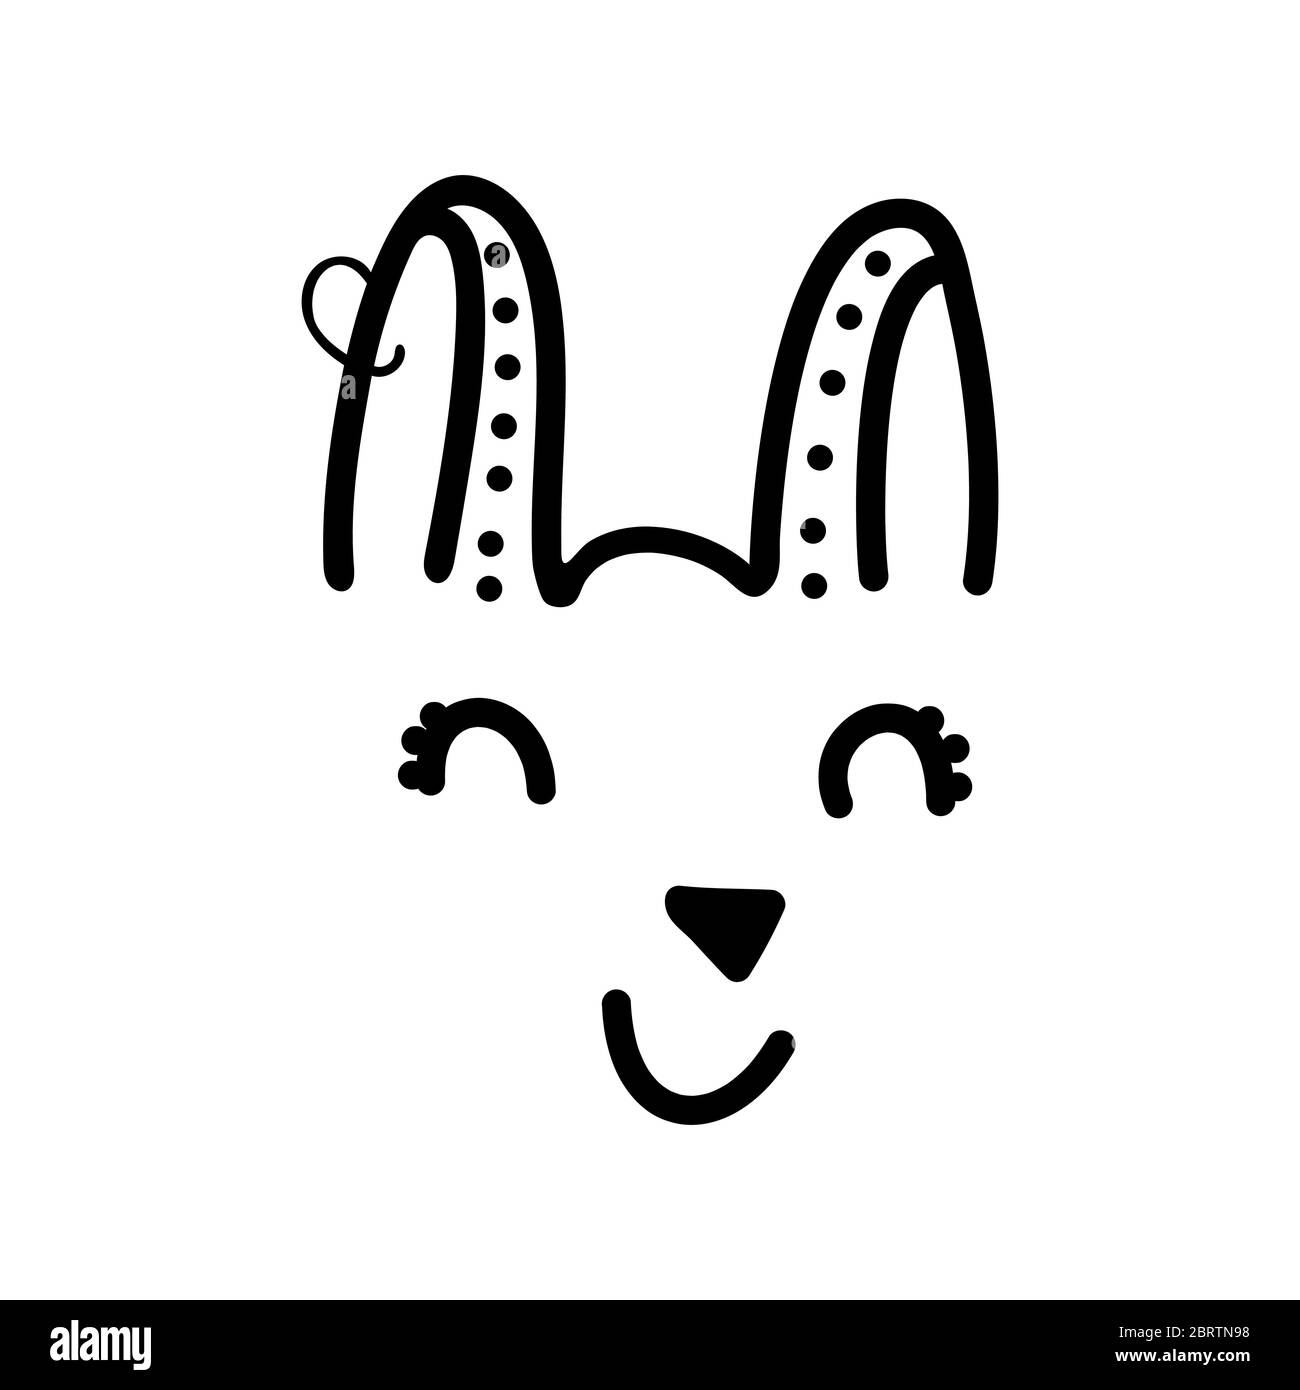 Cute hand drawn doodle simple bunny face icon with earring. Isolated on white background. Vector stock illustration. Stock Vector